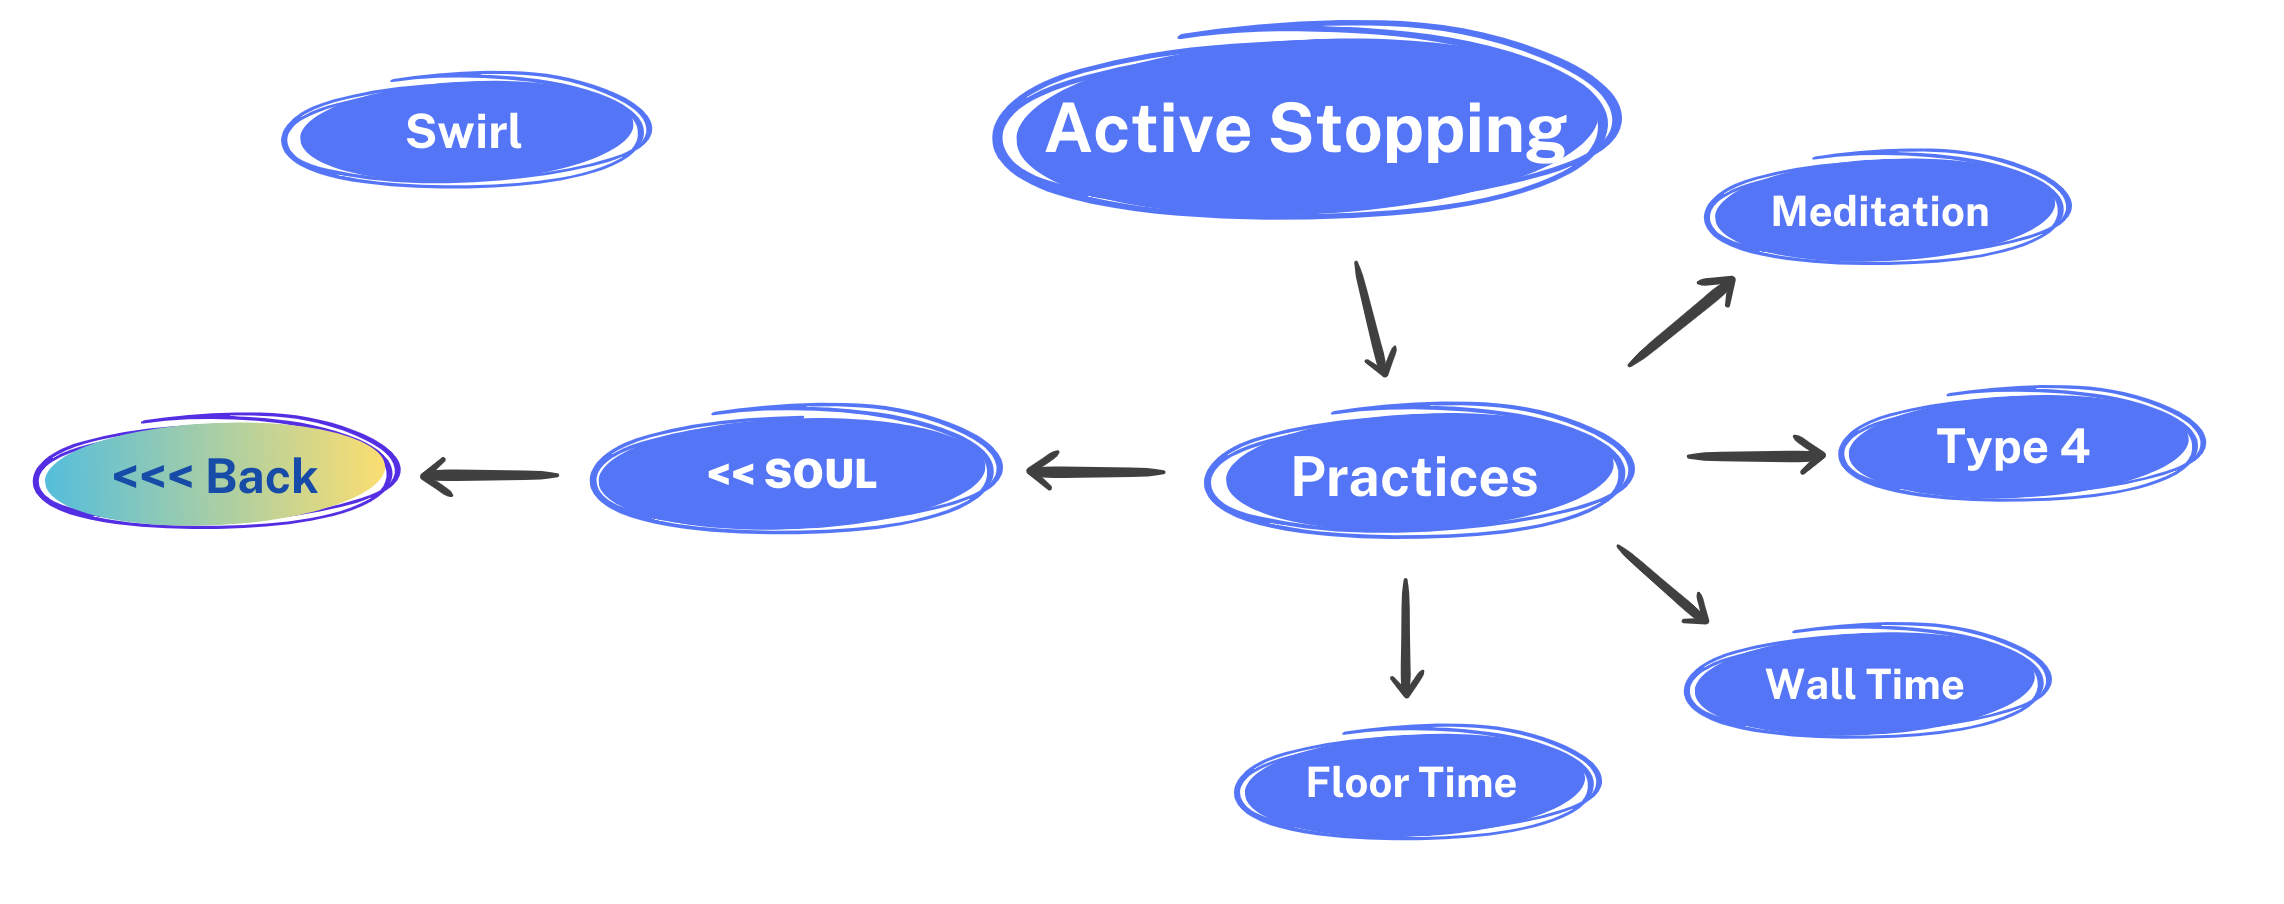 Active Stopping